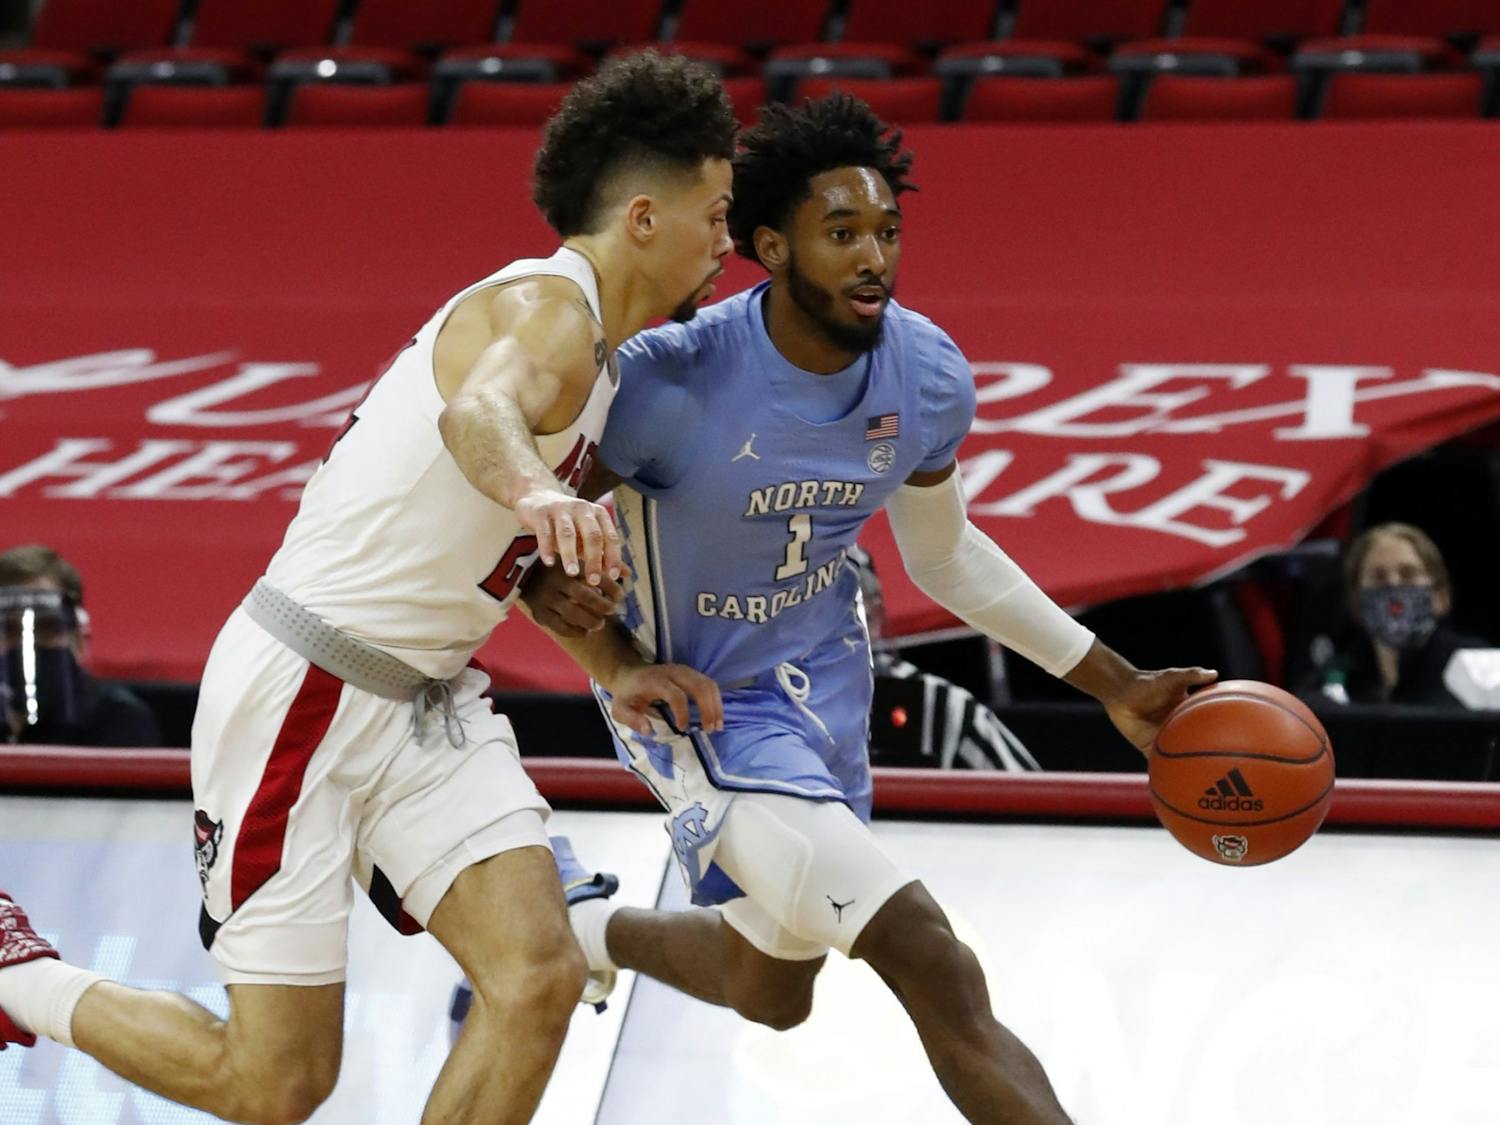 North Carolina's Leaky Black (1) drives past N.C. State's Devon Daniels (24) during the first half of N.C. State’s game against UNC at PNC Arena in Raleigh, N.C., Tuesday, December 22, 2020. Photo courtesy of Ethan Hyman.